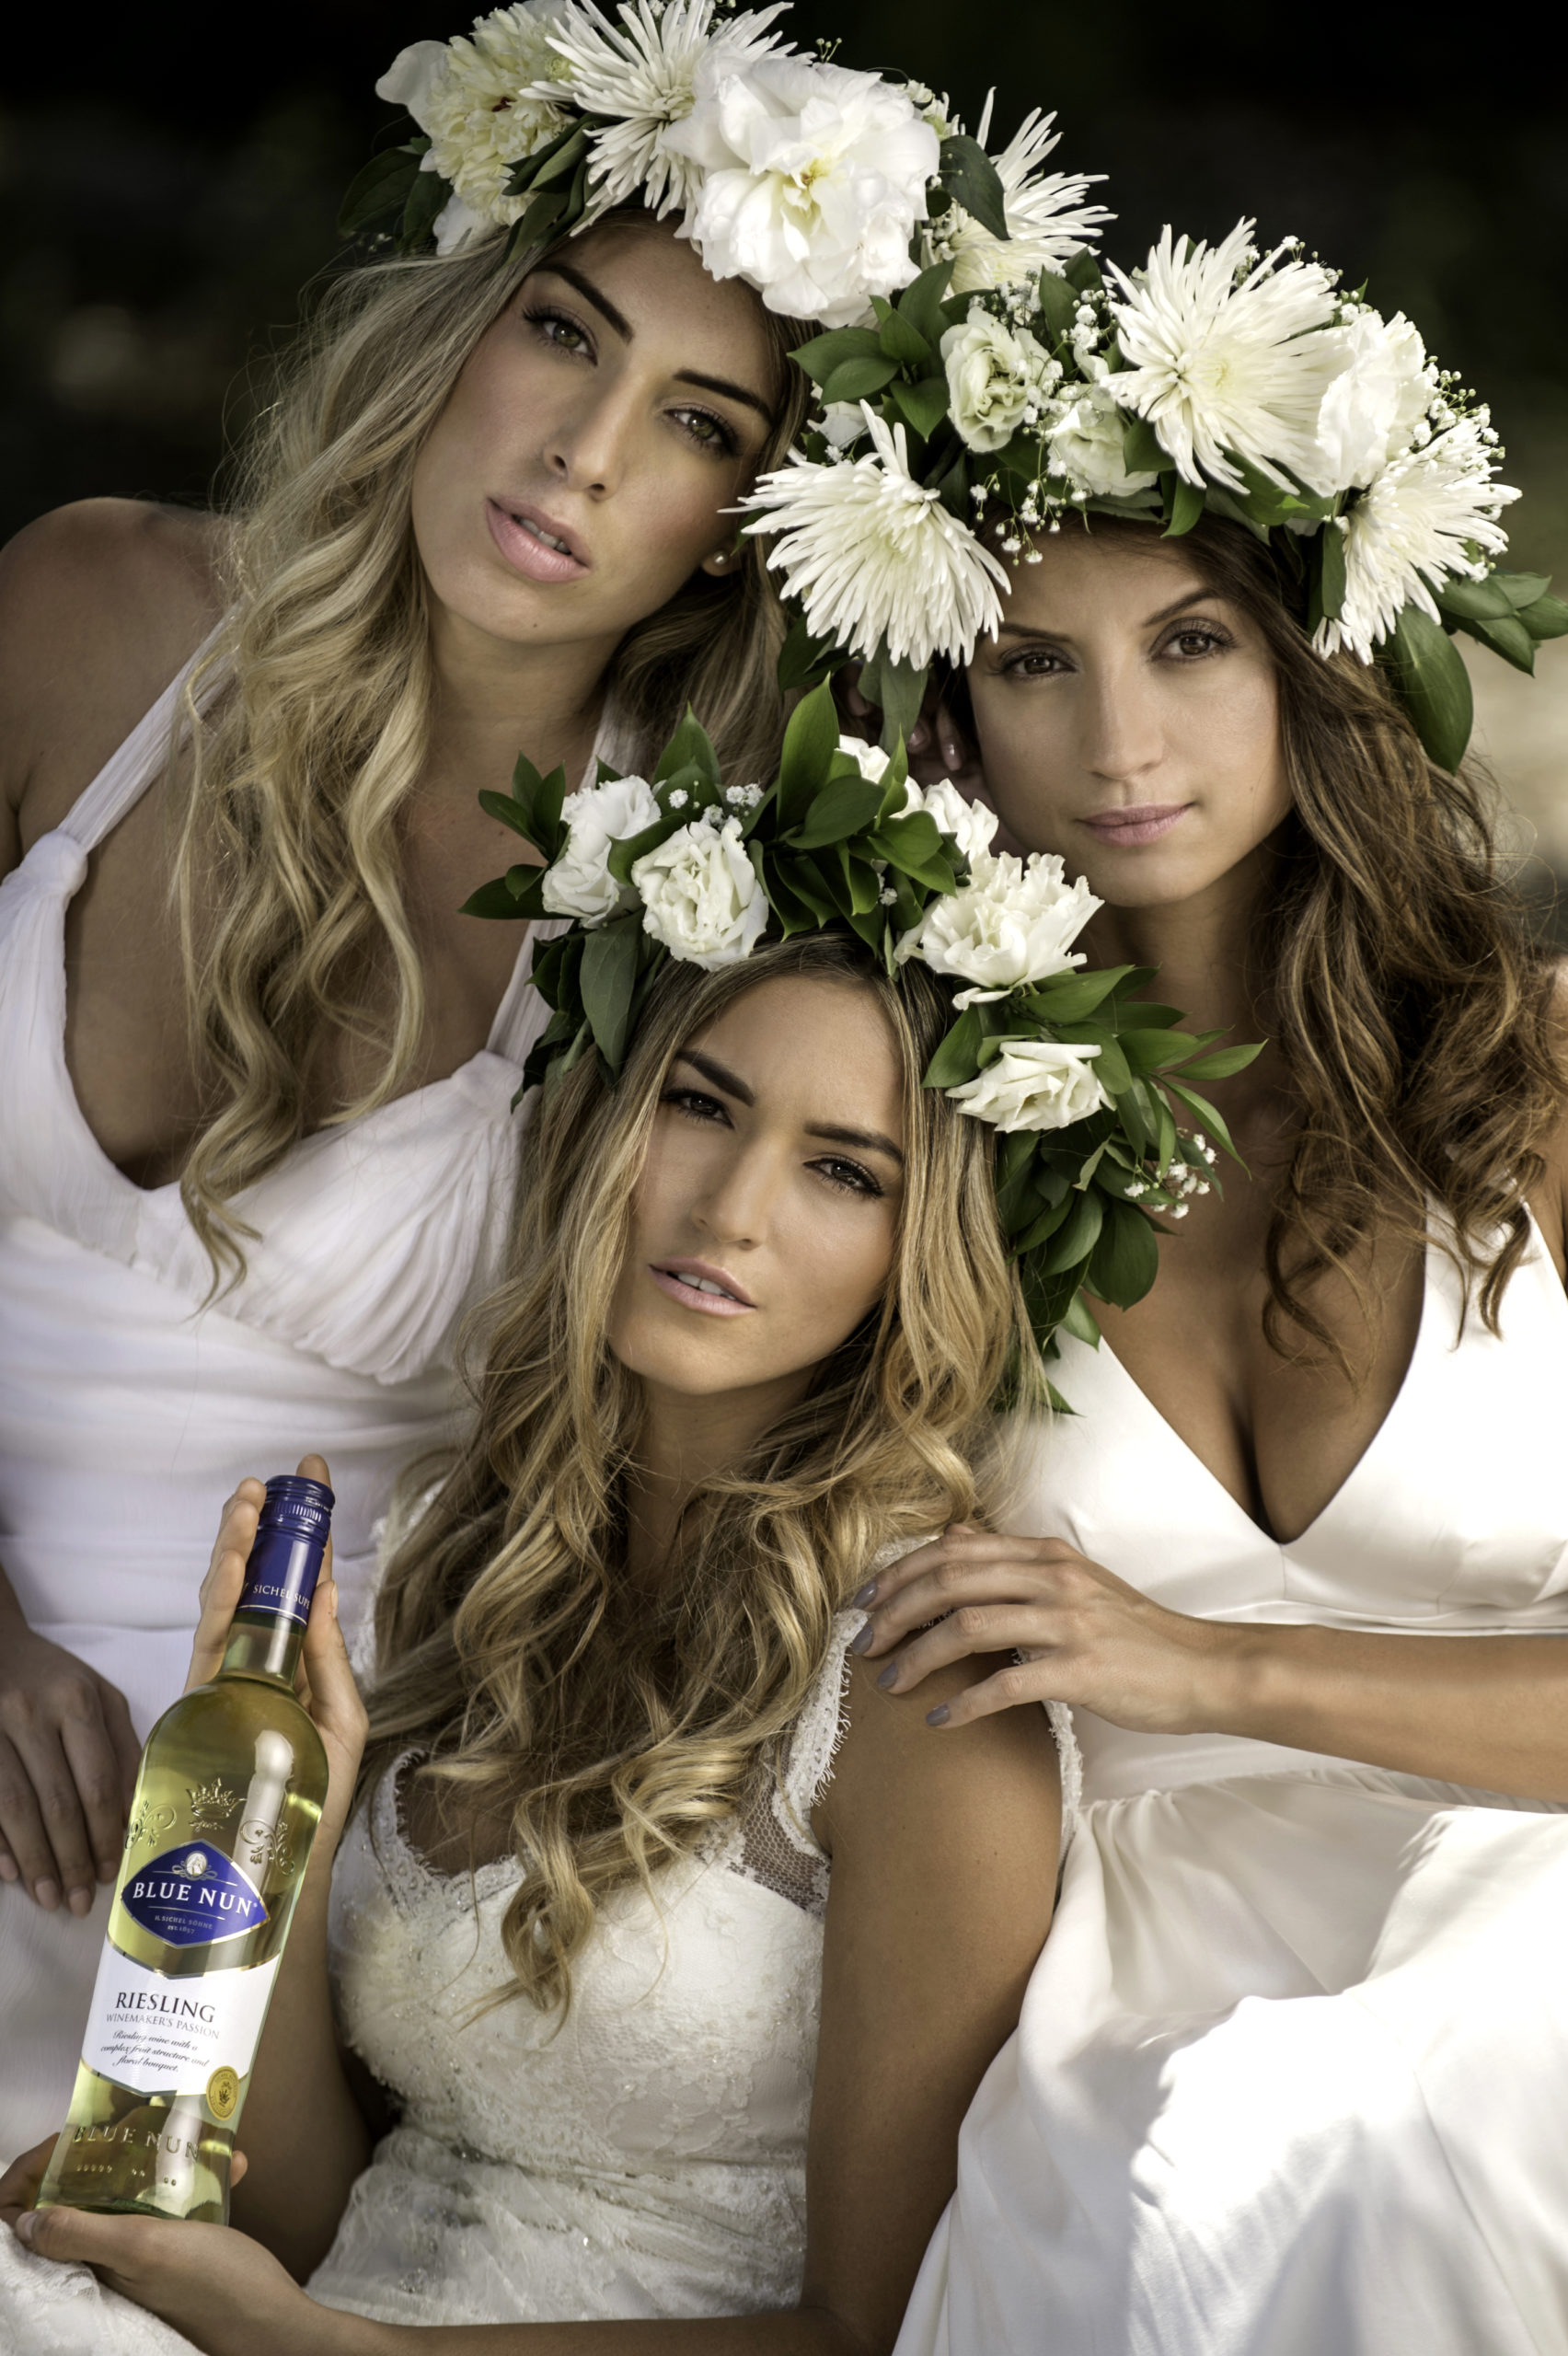 Professional Photography Services to elevate your brand C&I Studios Creative Marketing Blue Nun Three women wearing flower headdresses posing for the camera wearing white dressing gowns with one holding a bottle of Riesling wine